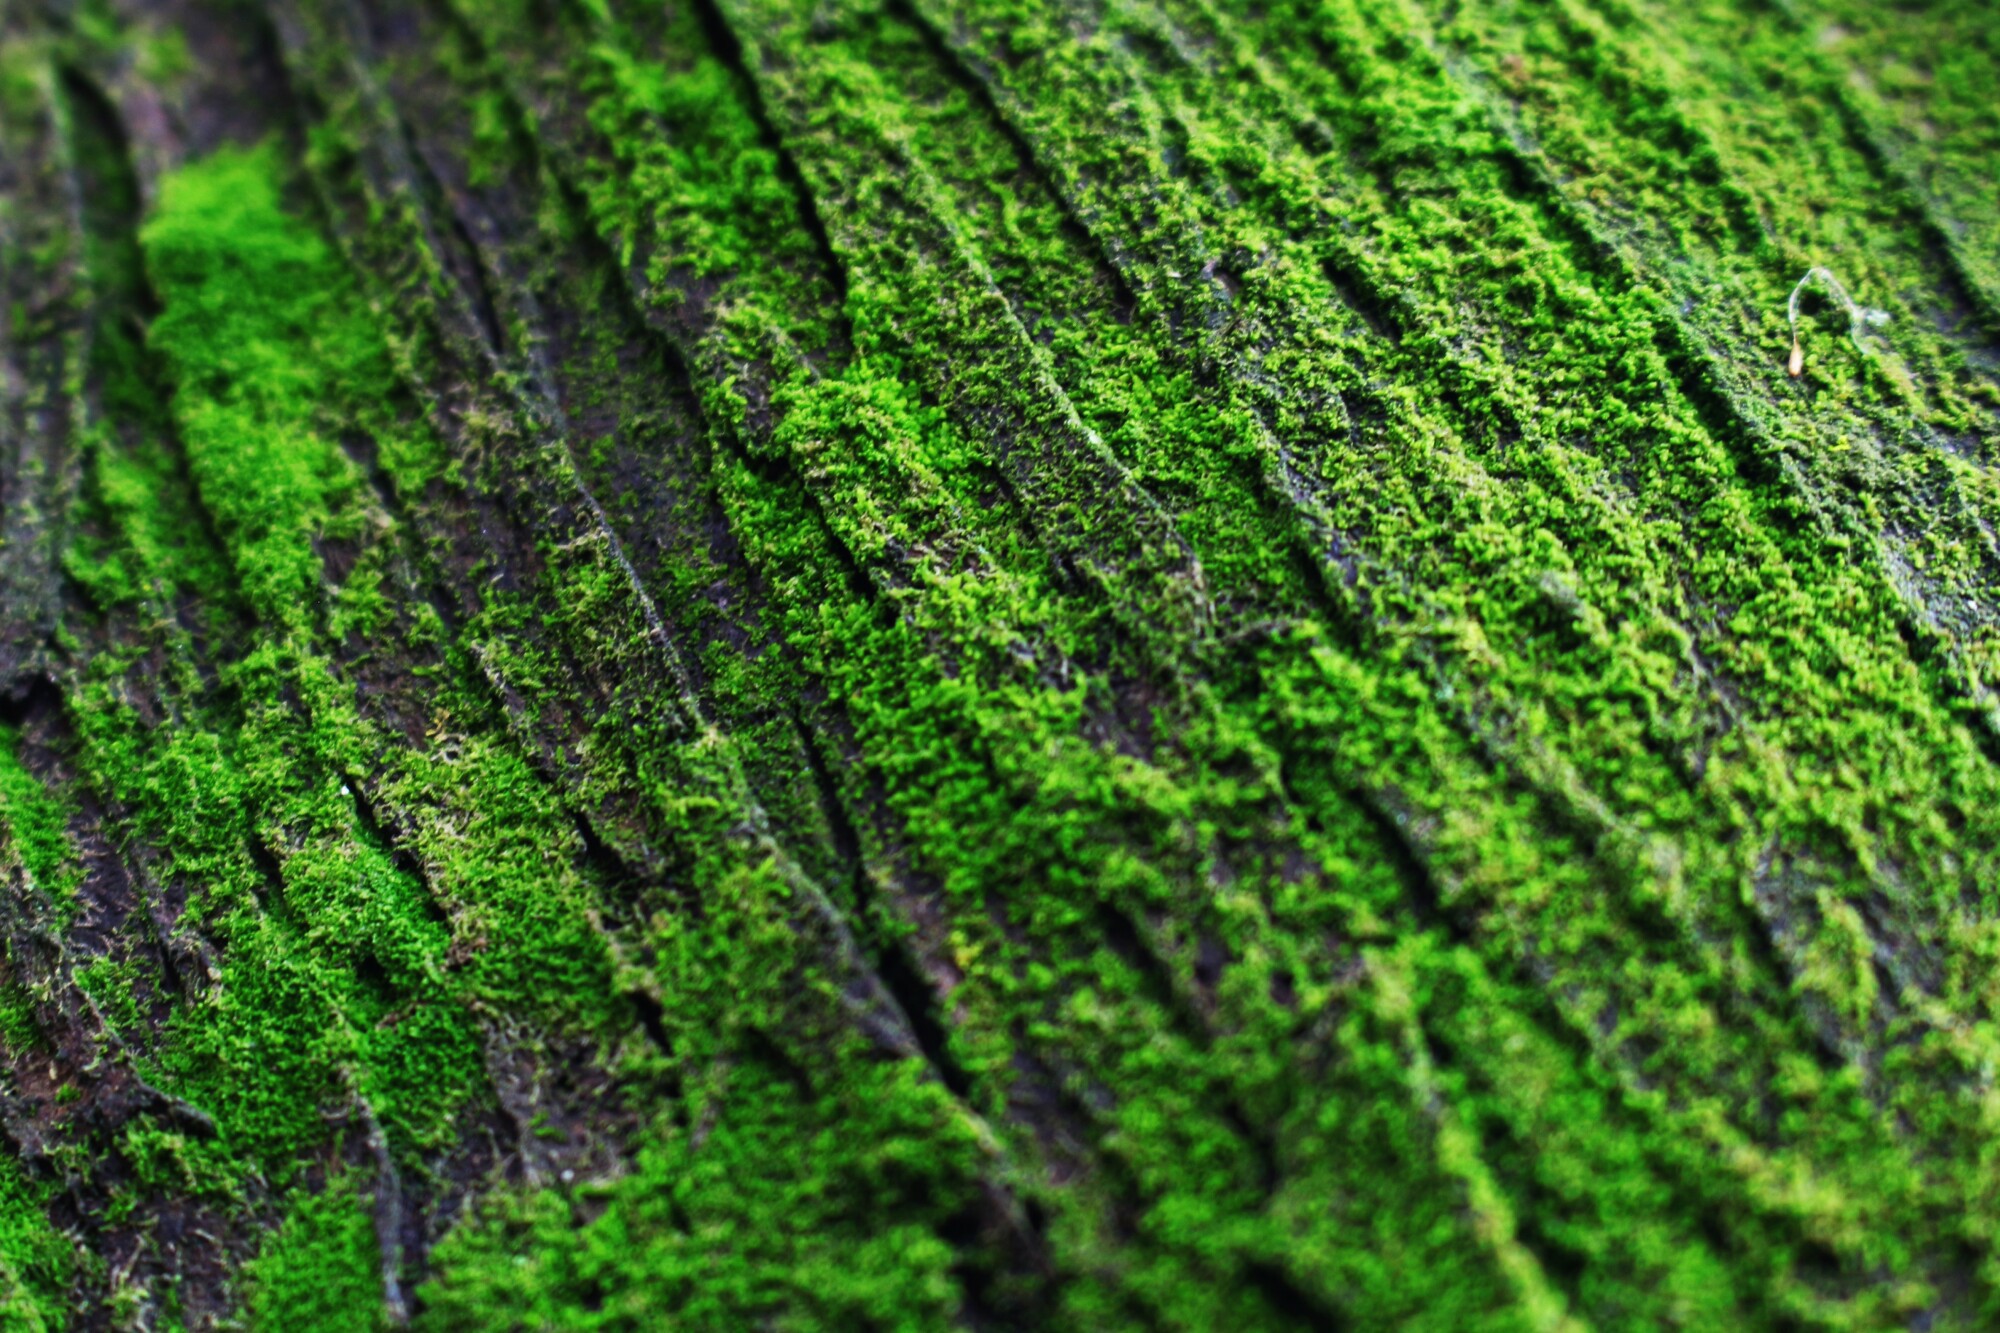 Preserved Moss Wall Art: Is It Right for You?